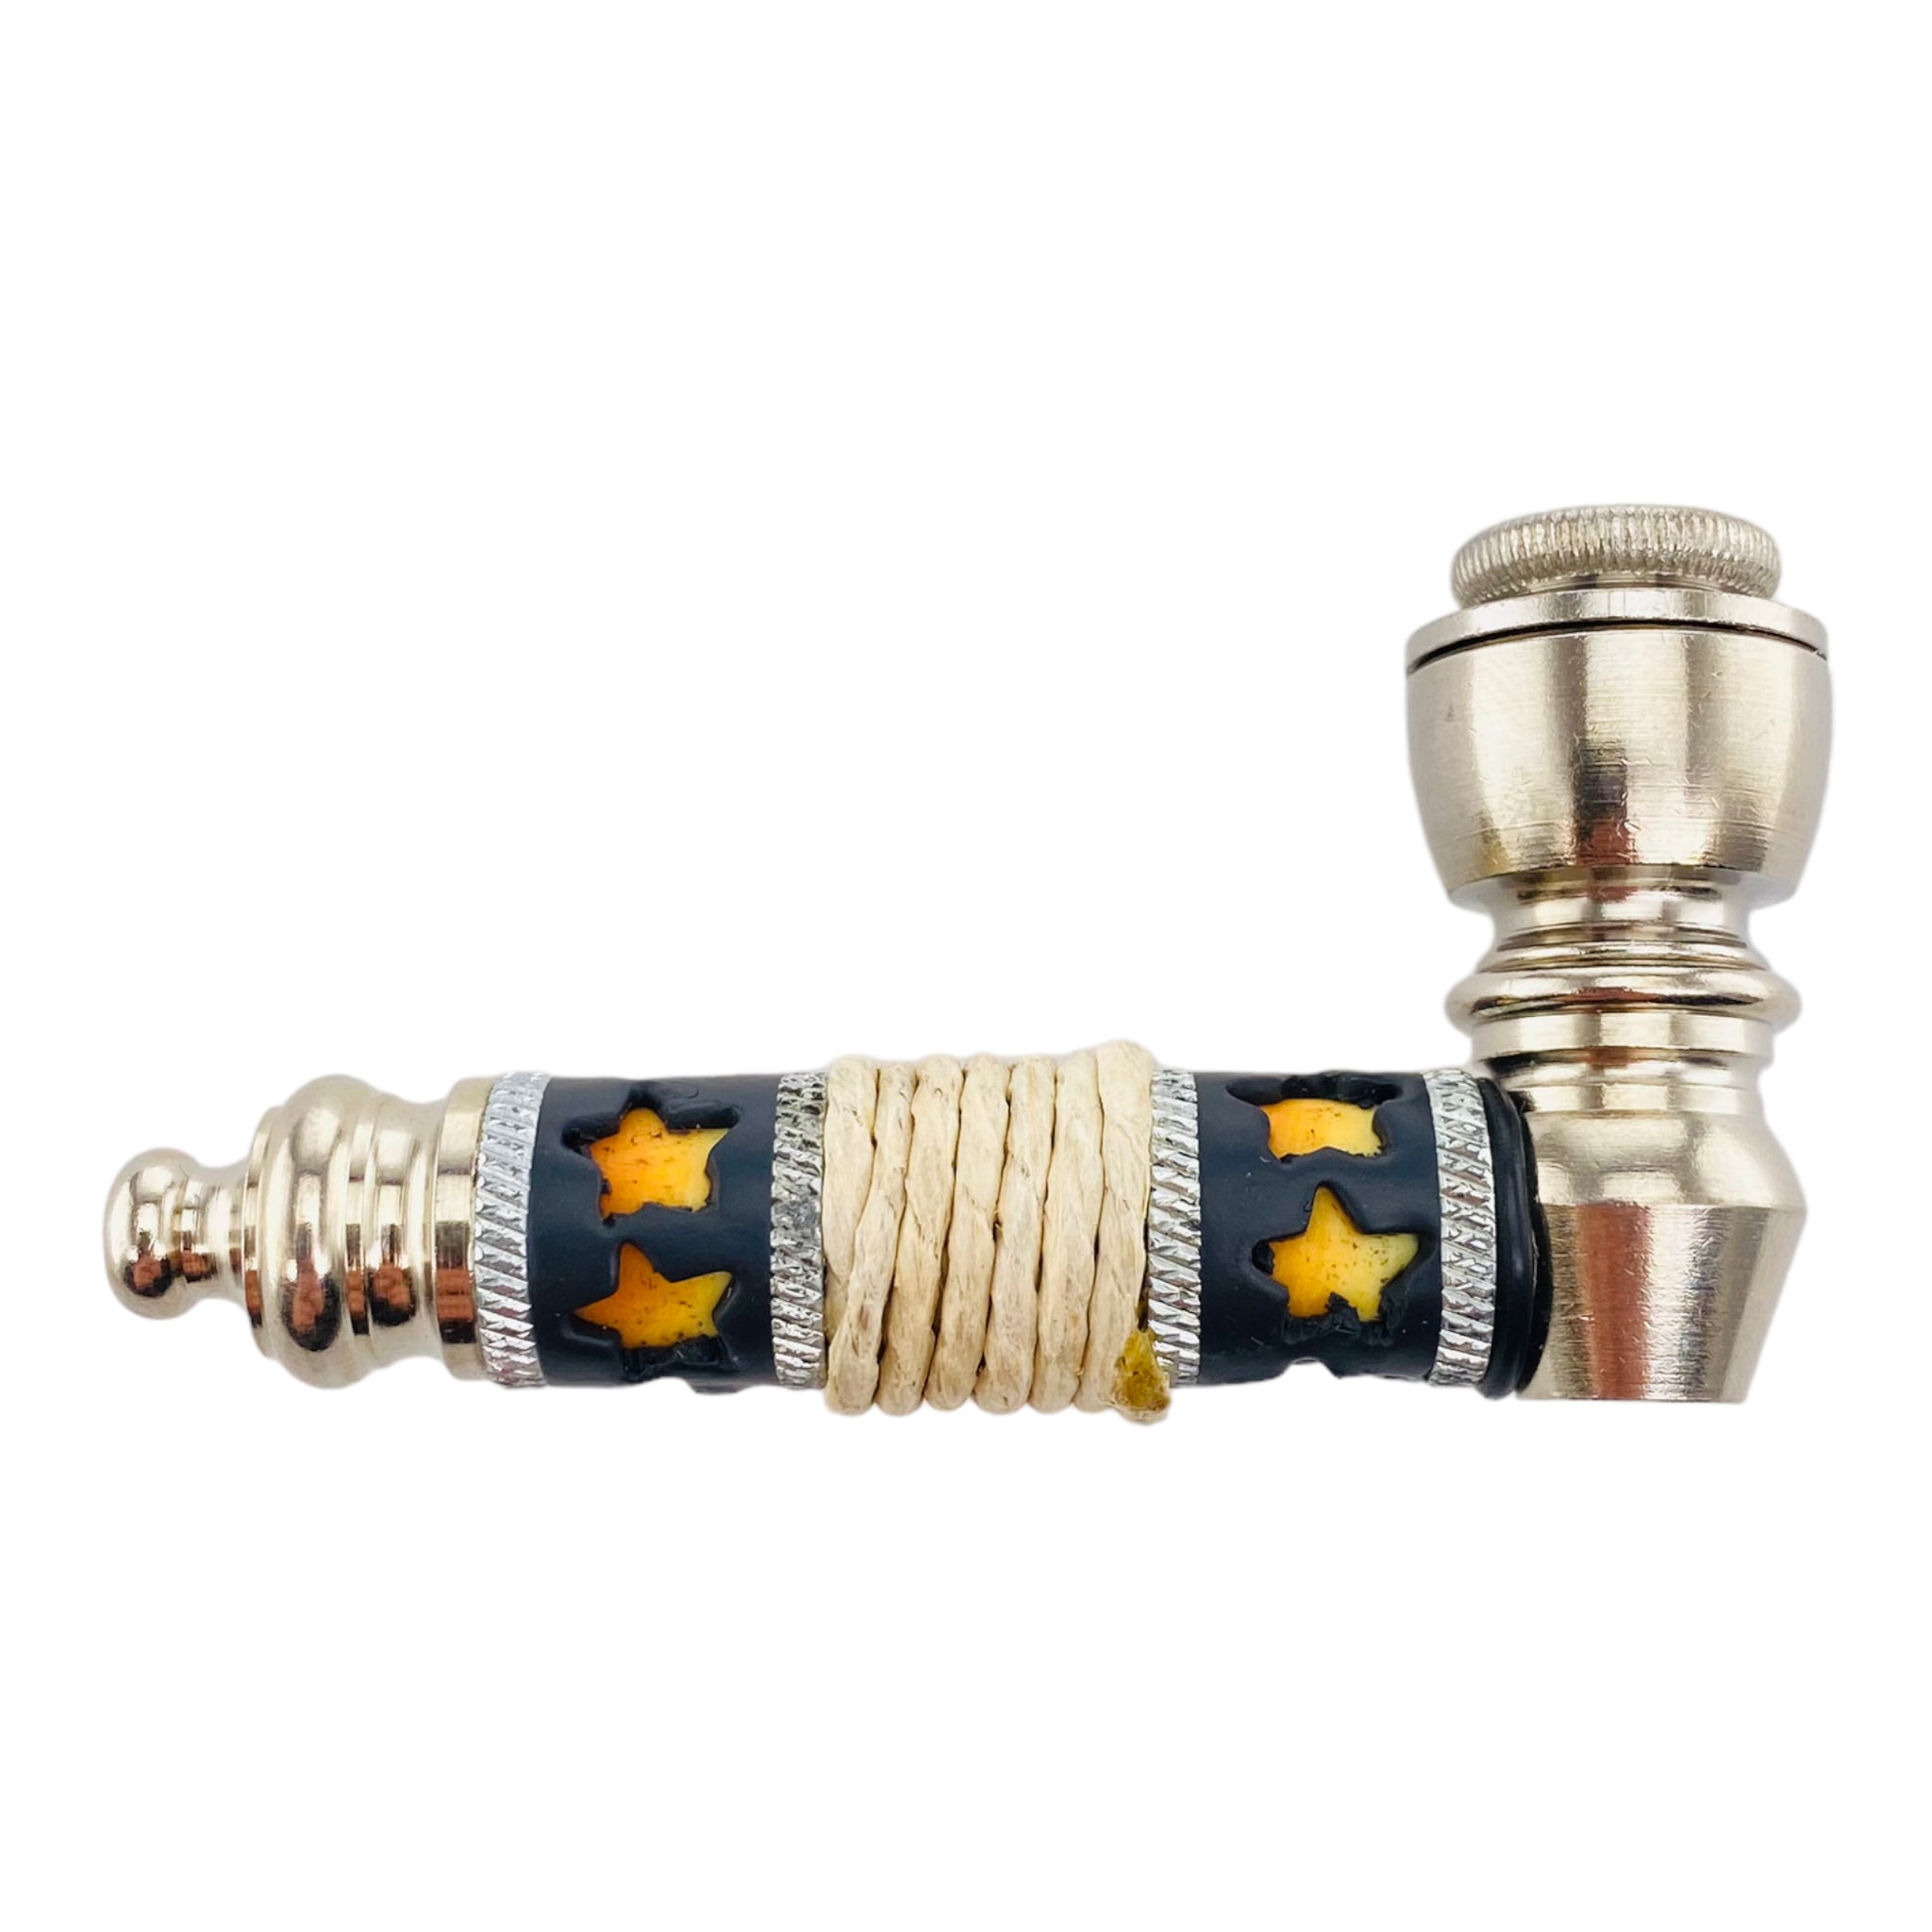 Metal Hand Pipes - Silver Chrome Hand Pipe With Yellow Stars